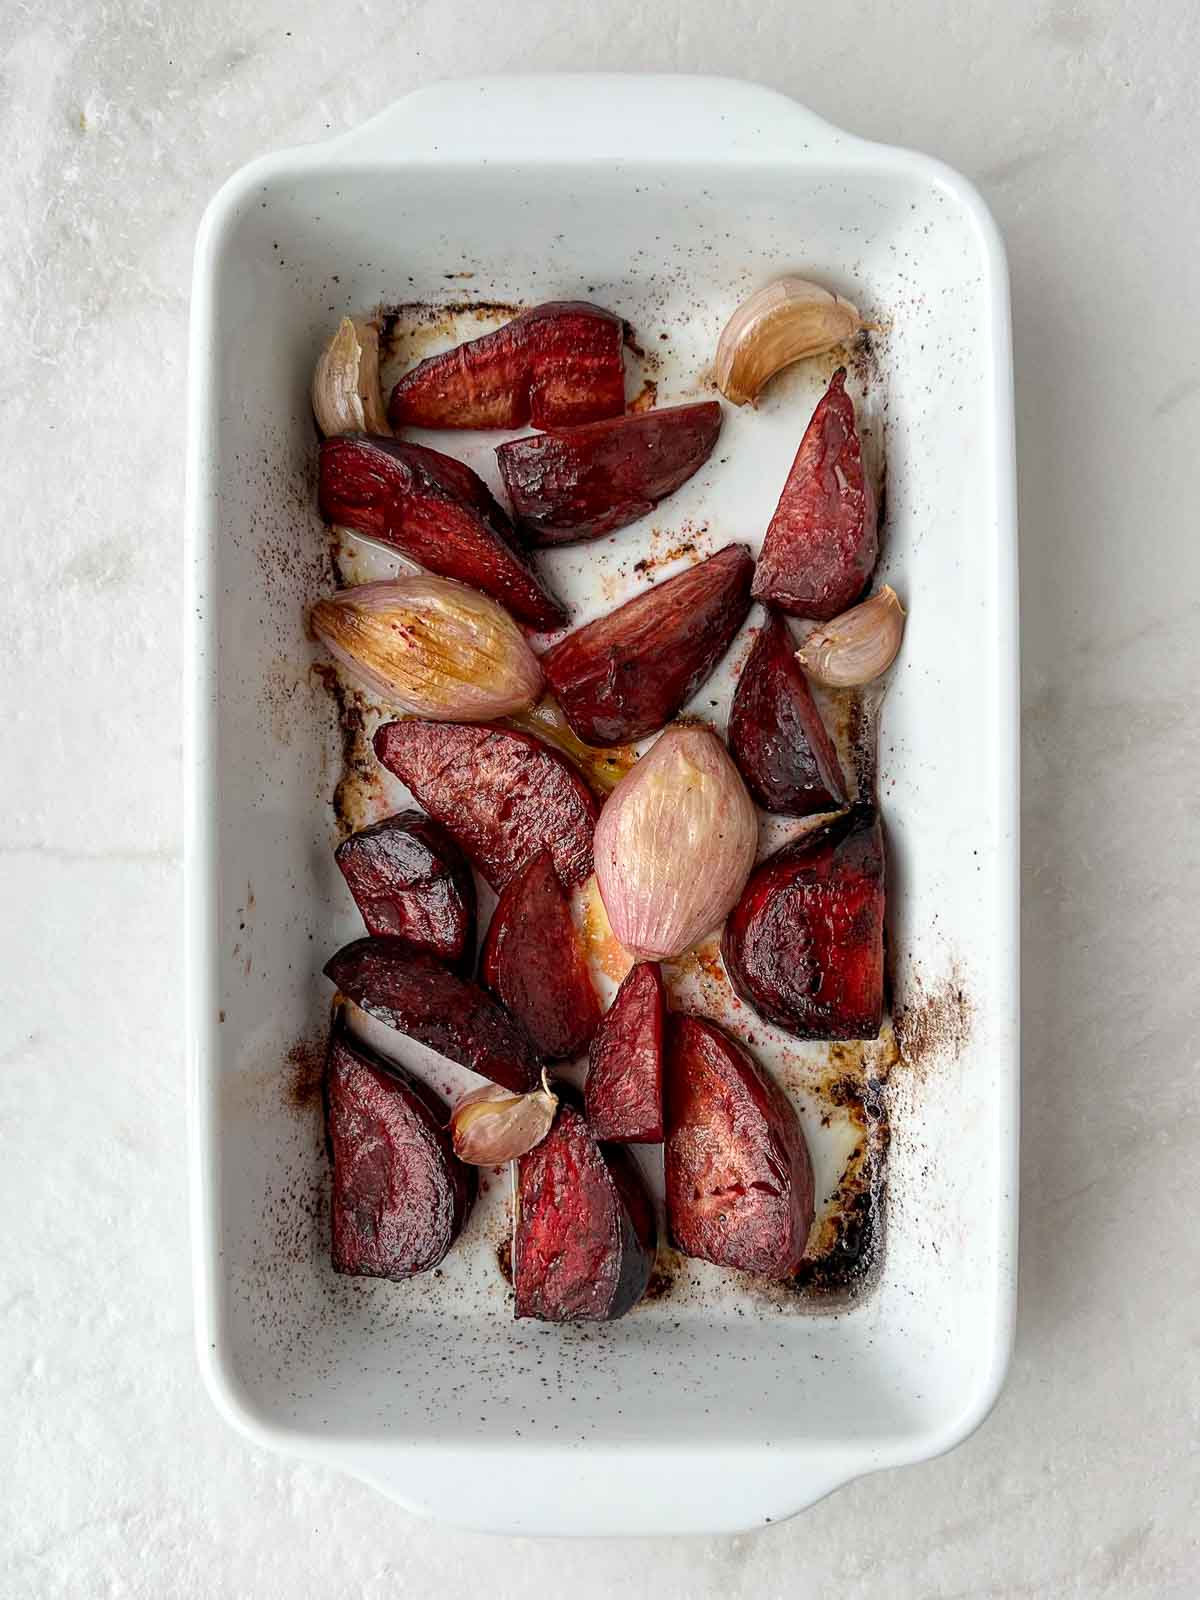 Roasted beets, shallot, and garlic in olive oil in a white baking dish.